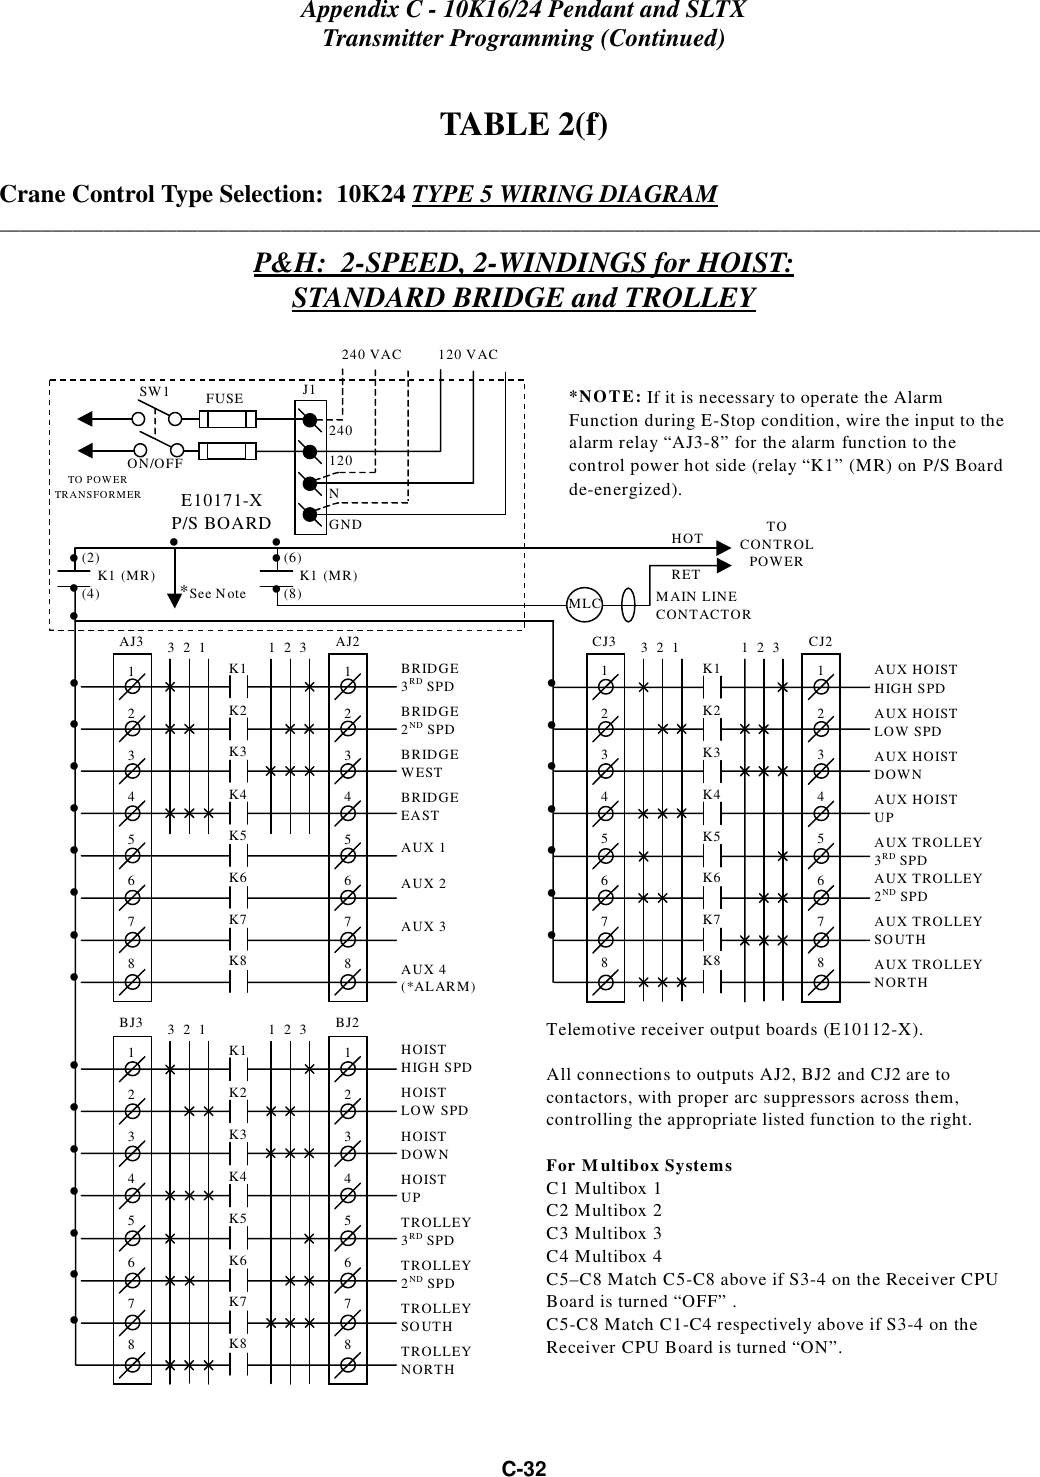 Appendix C - 10K16/24 Pendant and SLTXTransmitter Programming (Continued)C-32TABLE 2(f)Crane Control Type Selection:  10K24 TYPE 5 WIRING DIAGRAM____________________________________________________________________________________________________P&amp;H:  2-SPEED, 2-WINDINGS for HOIST:STANDARD BRIDGE and TROLLEYCJ312345678CJ212345678K1K2K3K4K5K6K7K83  2  1 1  2  3AUX HOISTHIGH SPDAUX HOISTLOW SPDAUX HOISTDOWNAUX HOISTUPAUX TROLLEY3RD SPDAUX TROLLEY2ND SPDAUX TROLLEYSOUTHAUX TROLLEYNORTH• • • • • • • BJ312345678BJ212345678K1K2K3K4K5K6K7K83  2  1 1  2  3HOISTHIGH SPDHOISTLOW SPDHOISTDOWNHOISTUPTROLLEY3RD SPDTROLLEY2ND SPDTROLLEYSOUTHTROLLEYNORTH• • • • • • AJ312345678AJ212345678K1K2K3K4K5K6K7K83  2  1 1  2  3BRIDGE3RD SPDBRIDGE2ND SPDBRIDGEWESTBRIDGEEASTAUX 1AUX 2AUX 3AUX 4(*ALARM)• • • • • • • • *NOTE: If it is necessary to operate the AlarmFunction during E-Stop condition, wire the input to thealarm relay “AJ3-8” for the alarm function to thecontrol power hot side (relay “K1” (MR) on P/S Boardde-energized).240 VAC         120 VACSW1ON/OFFTO POWERTRANSFORMER E10171-XP/S BOARDMAIN LINECONTACTORTOCONTROLPOWERMLCHOTRET(2)    K1   (MR)(4)• • • *See Note• 240120FUSE J1NGND(6)    K1   (MR)(8)• • • • Telemotive receiver output boards (E10112-X).All connections to outputs AJ2, BJ2 and CJ2 are tocontactors, with proper arc suppressors across them,controlling the appropriate listed function to the right.For Multibox SystemsC1 Multibox 1C2 Multibox 2C3 Multibox 3C4 Multibox 4C5–C8 Match C5-C8 above if S3-4 on the Receiver CPUBoard is turned “OFF” .C5-C8 Match C1-C4 respectively above if S3-4 on theReceiver CPU Board is turned “ON”.